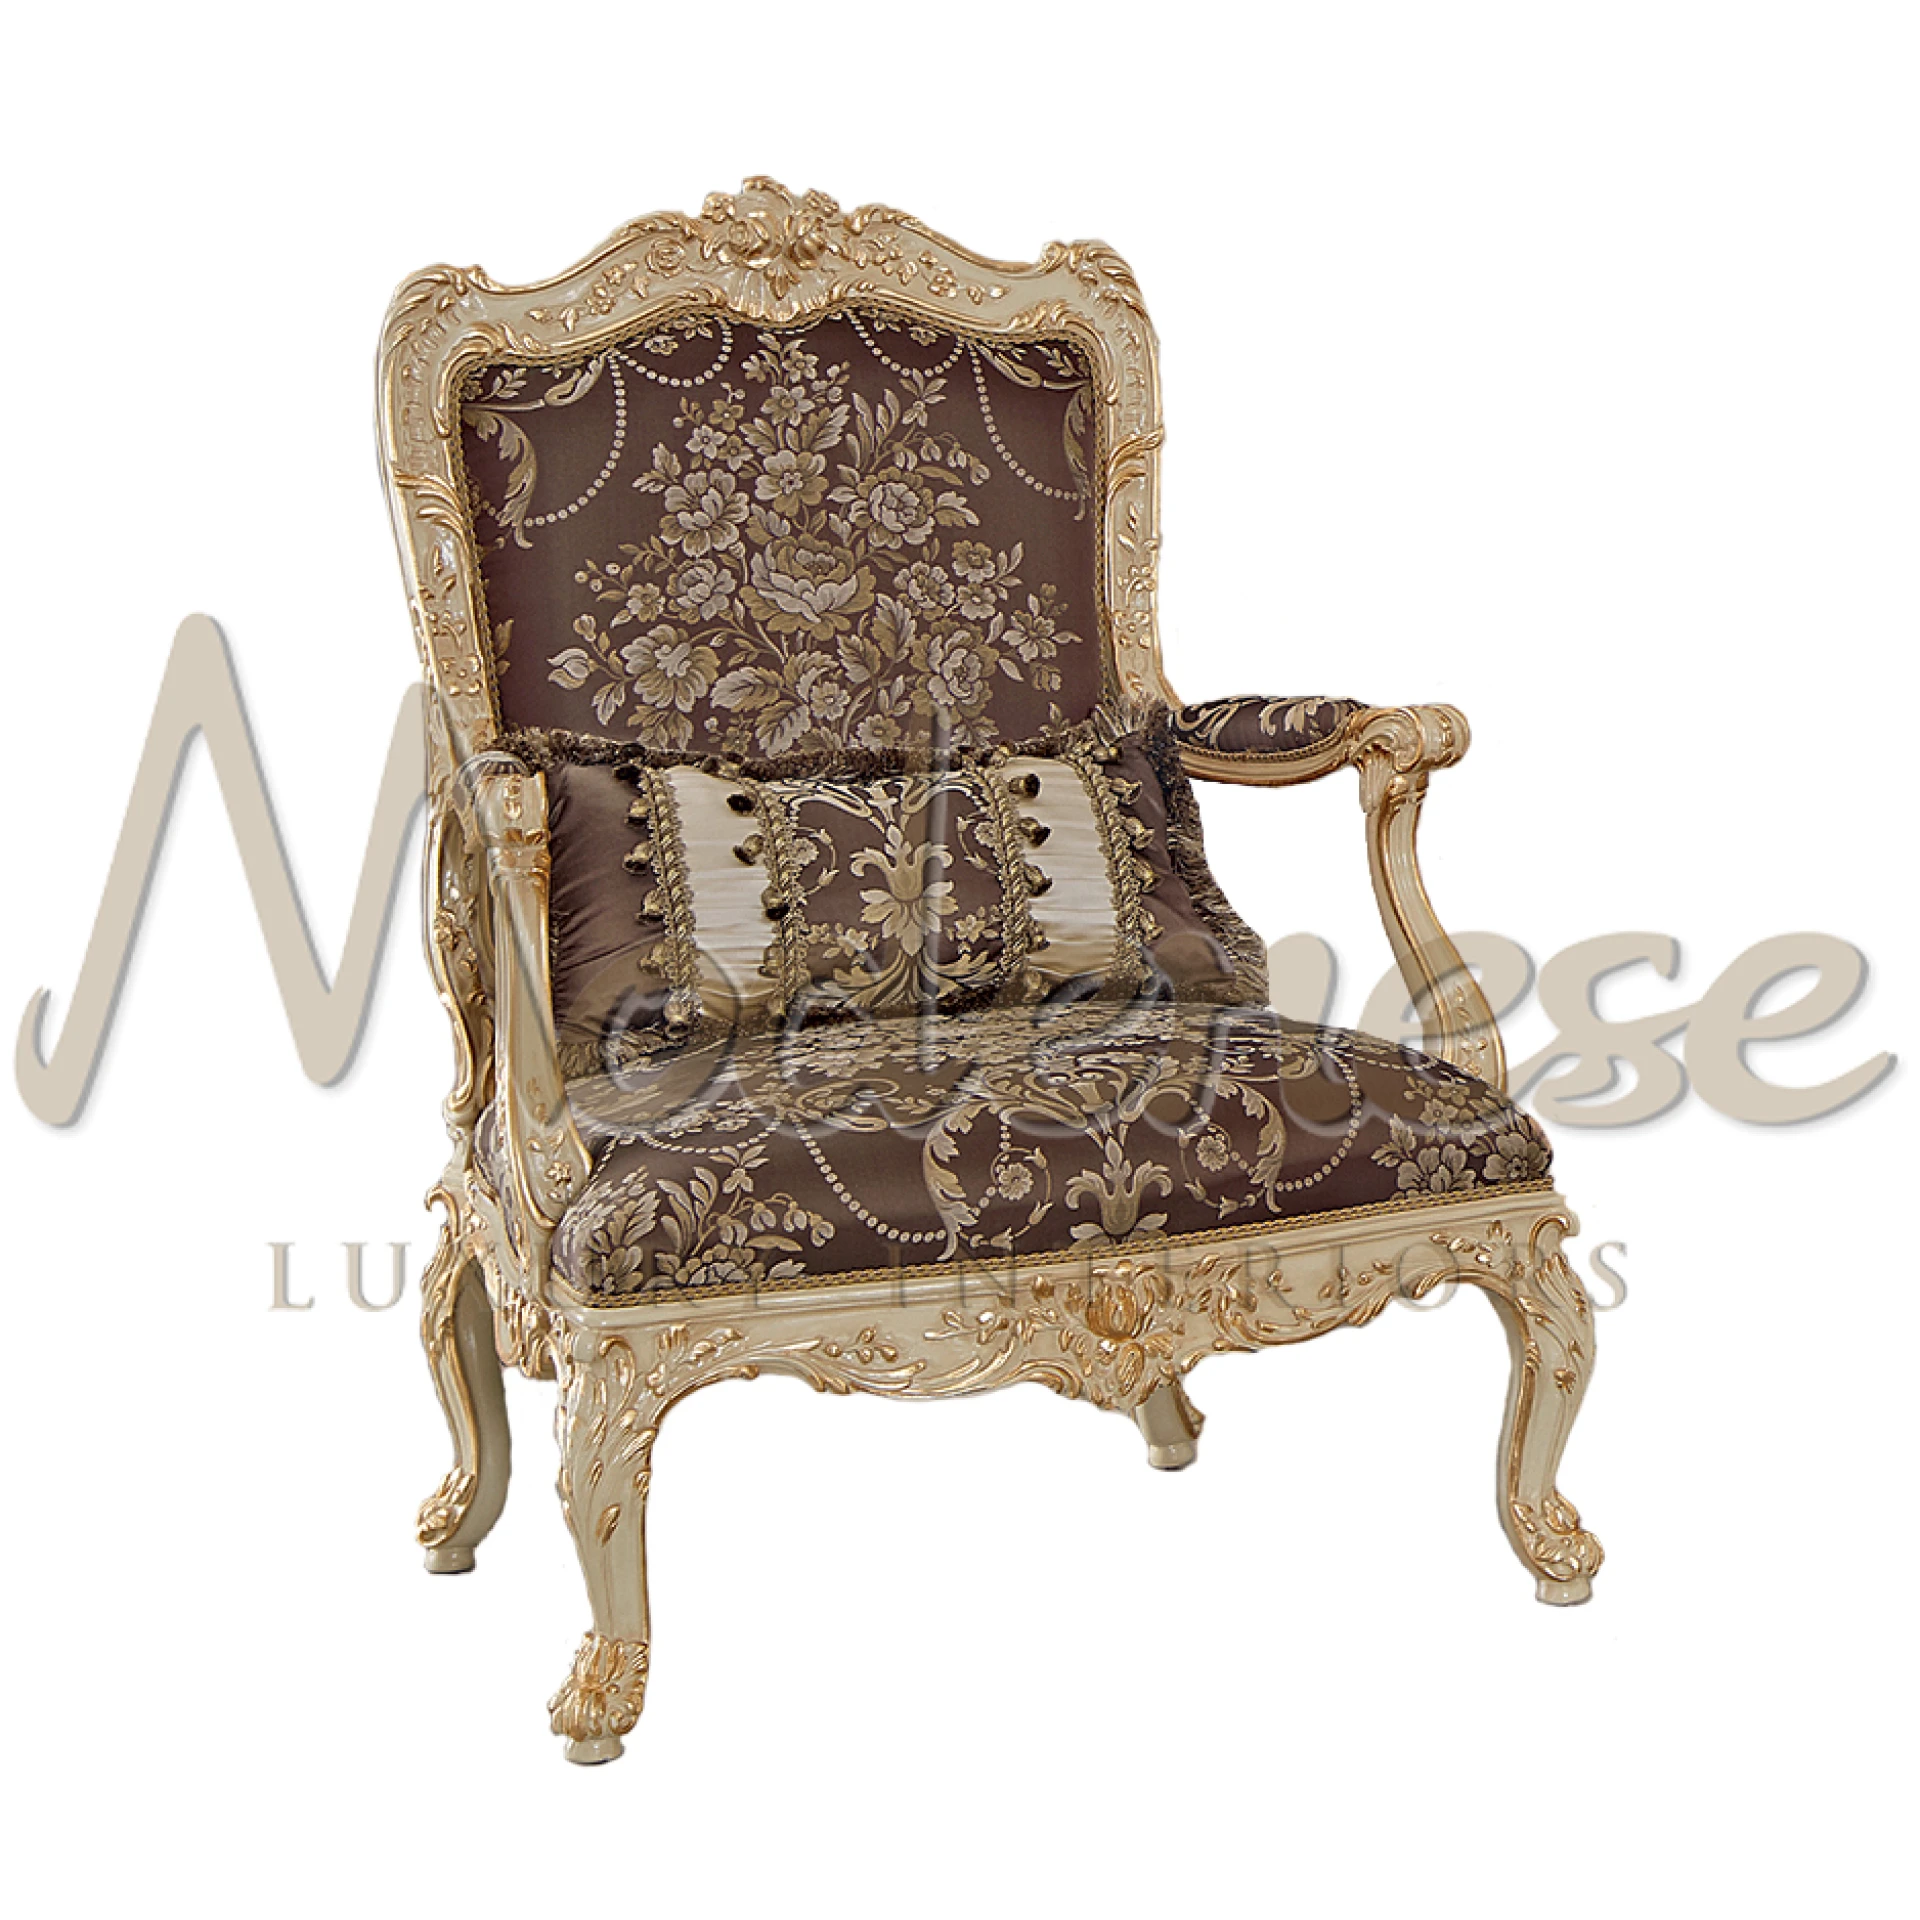 Dutch Brown Cream Armchair by Modenese: Luxurious Italian-style seating with golden details and solid wood frame.